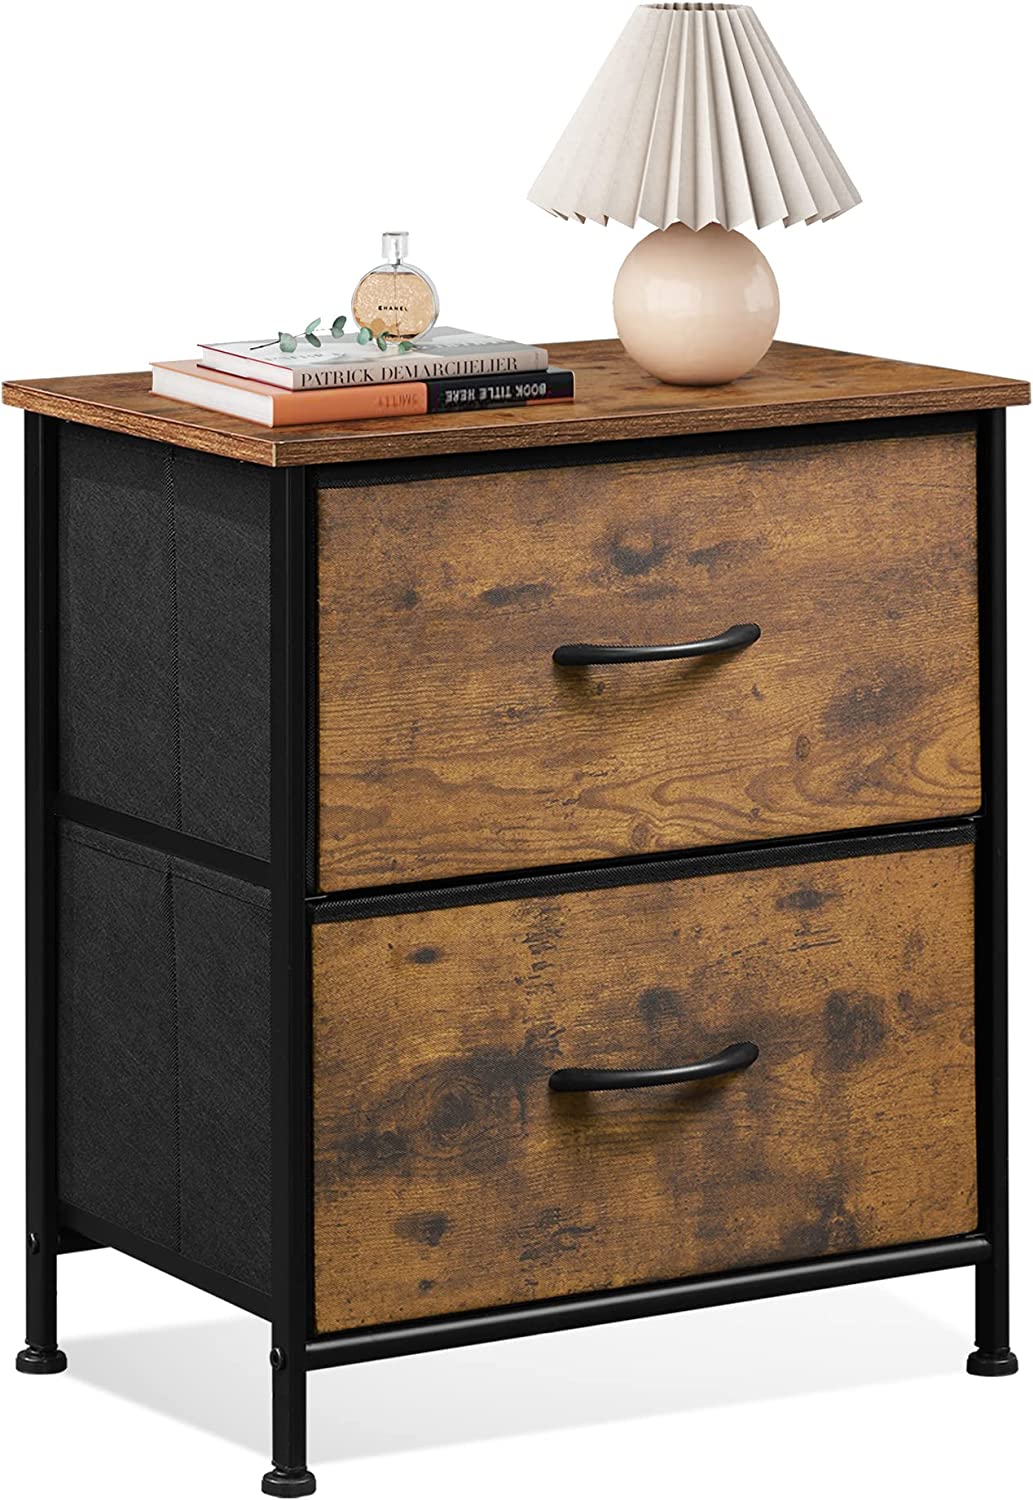 WLIVE Fabric Drawers Wooden Top Bedside Table